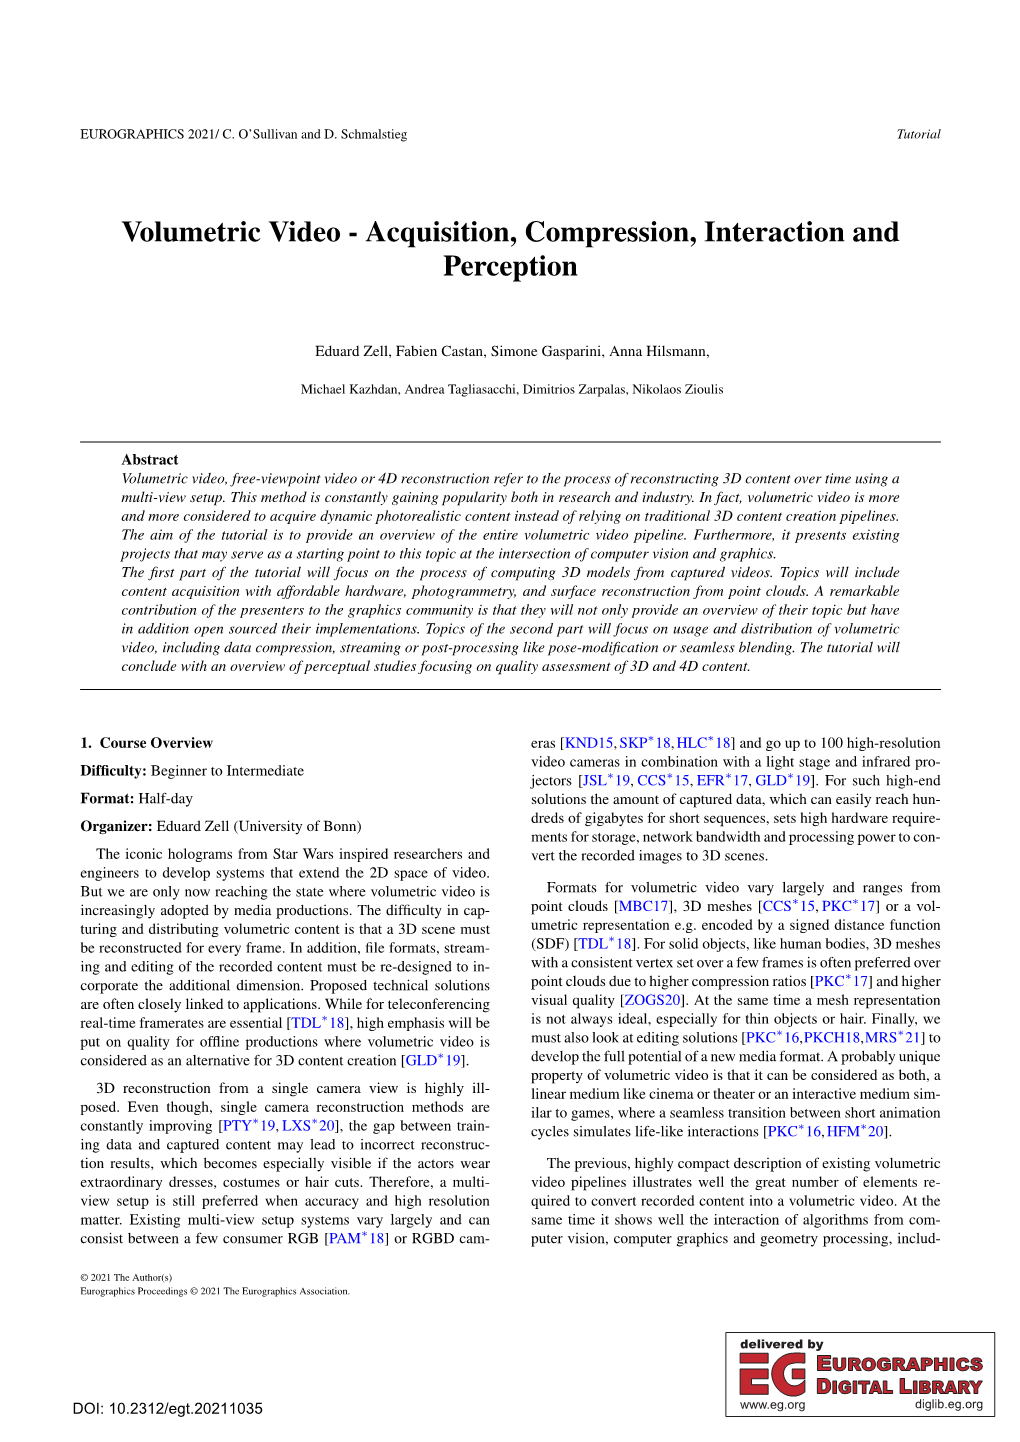 Volumetric Video - Acquisition, Compression, Interaction and Perception